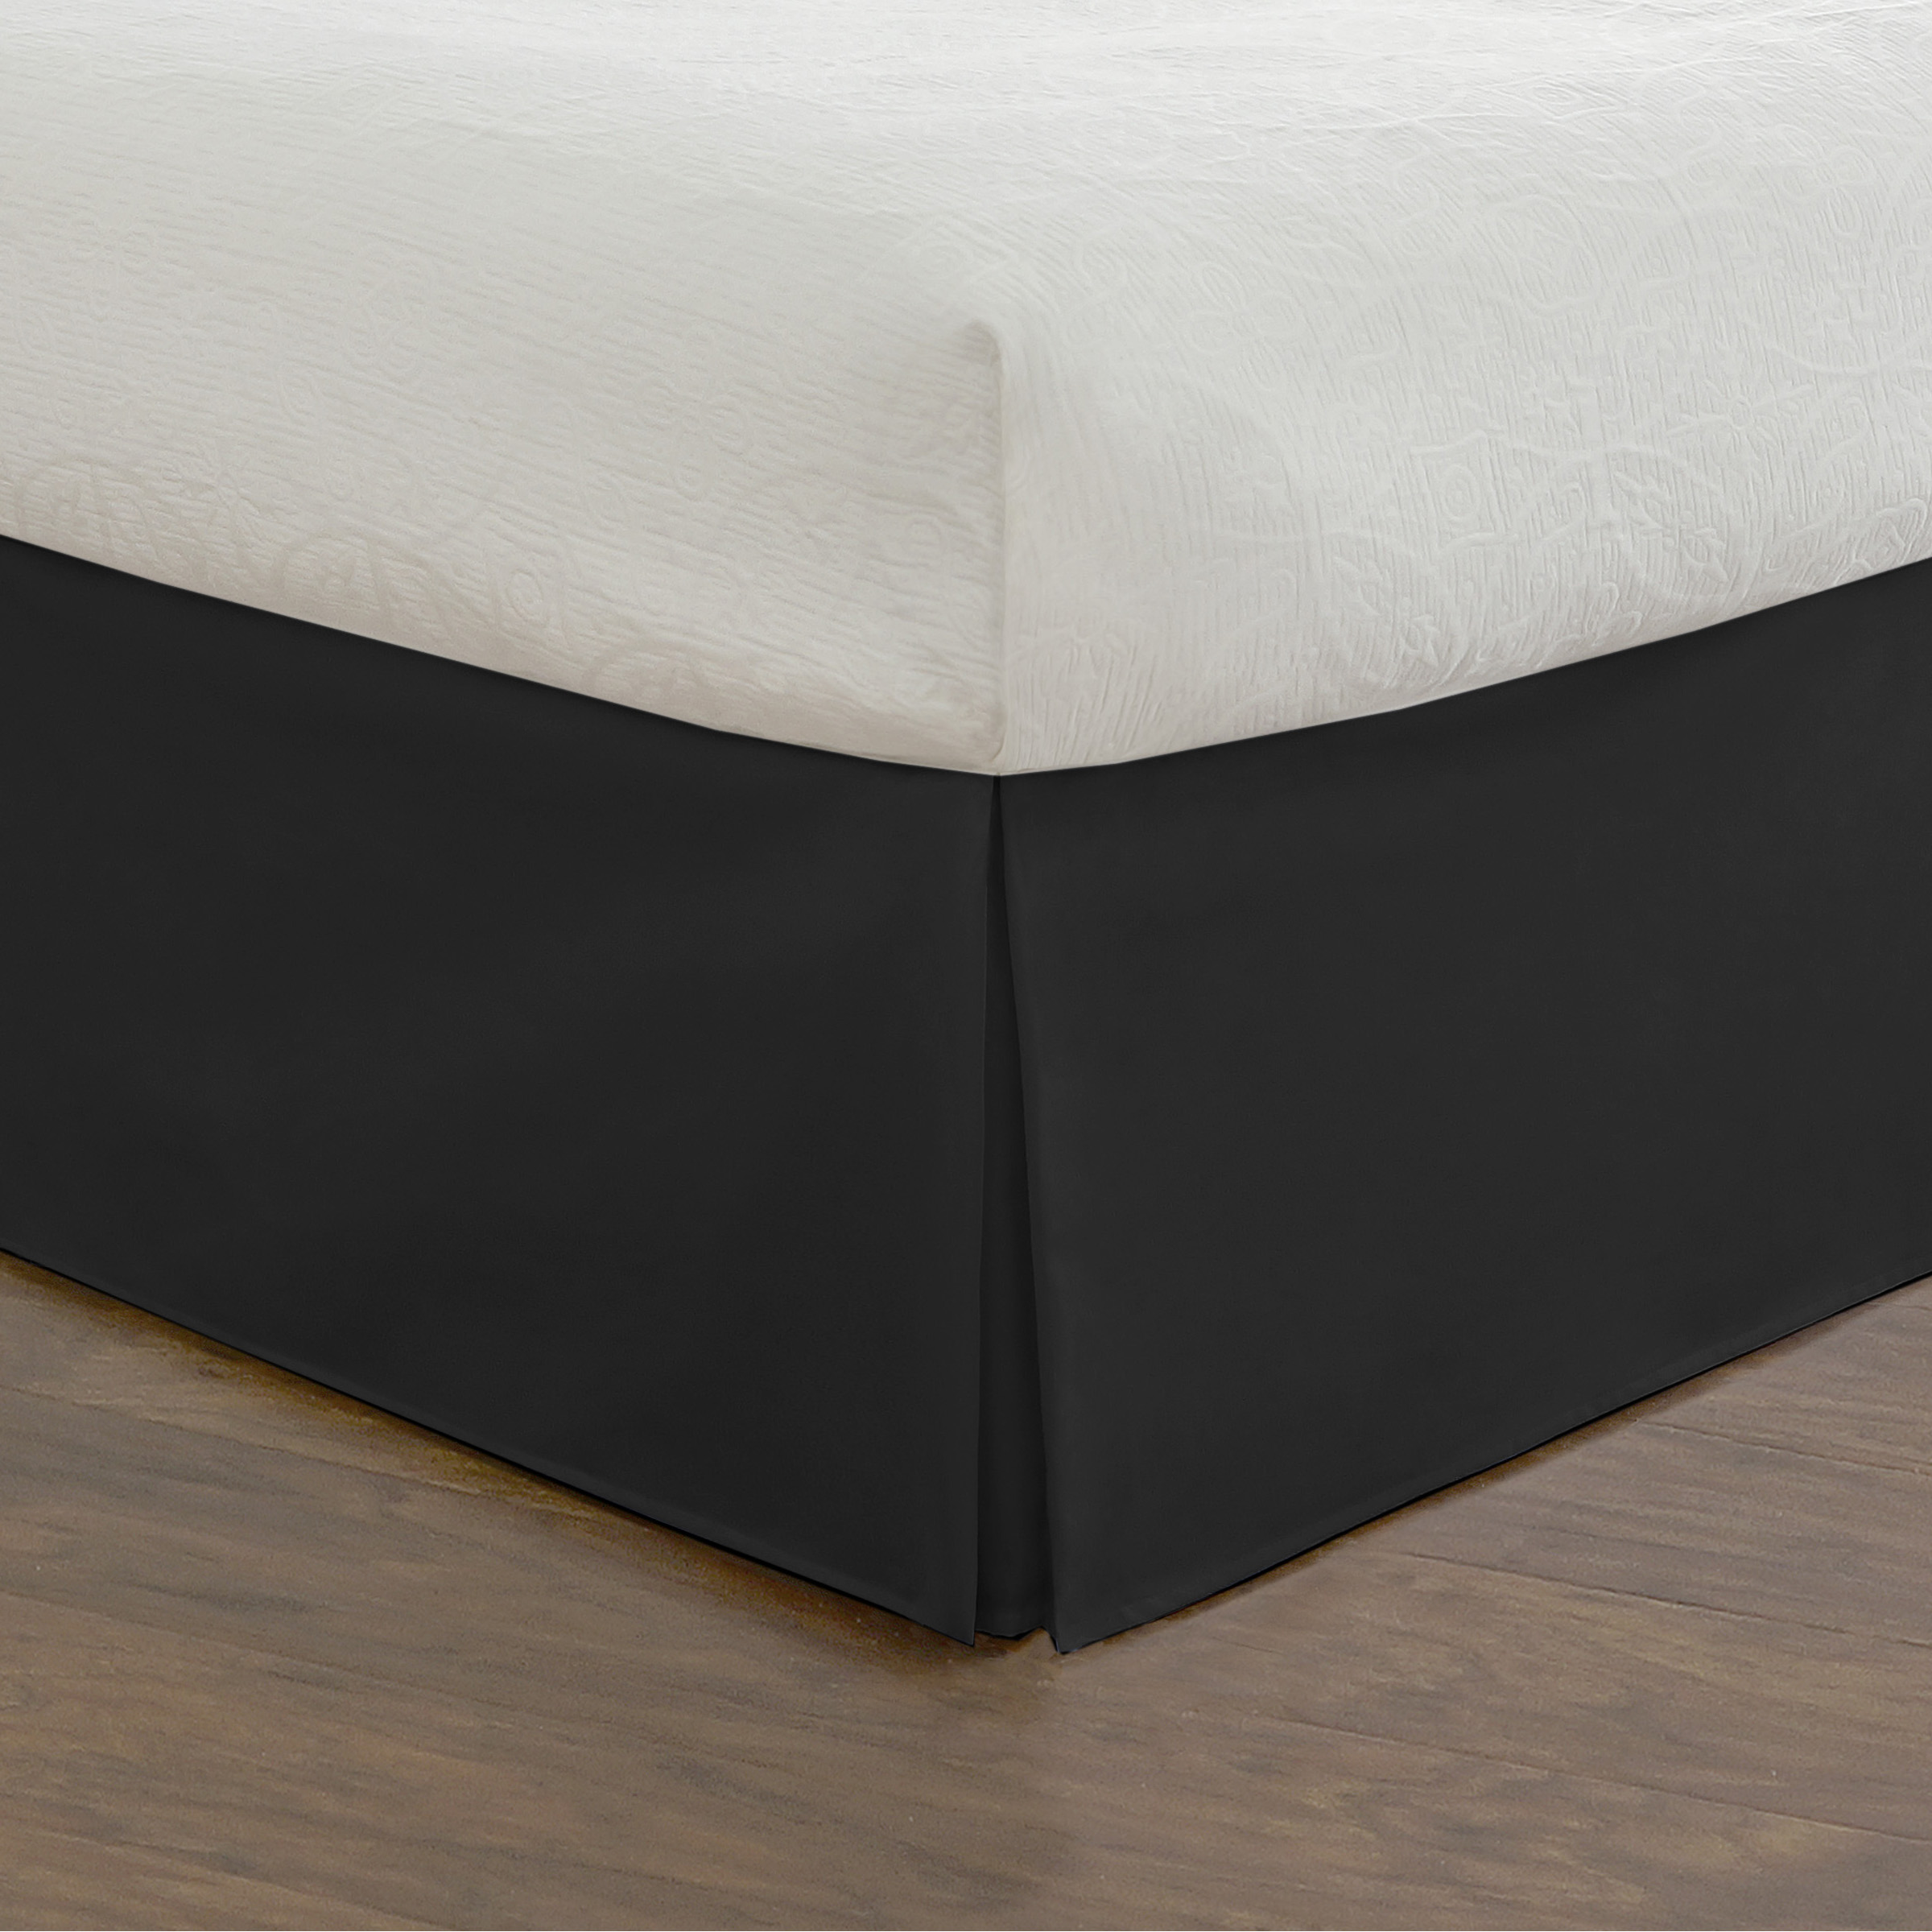 Fresh Ideas Bedding Tailored Bed Skirt, Classic 14” Drop Length, Pleated Styling, Twin, Black - image 1 of 6